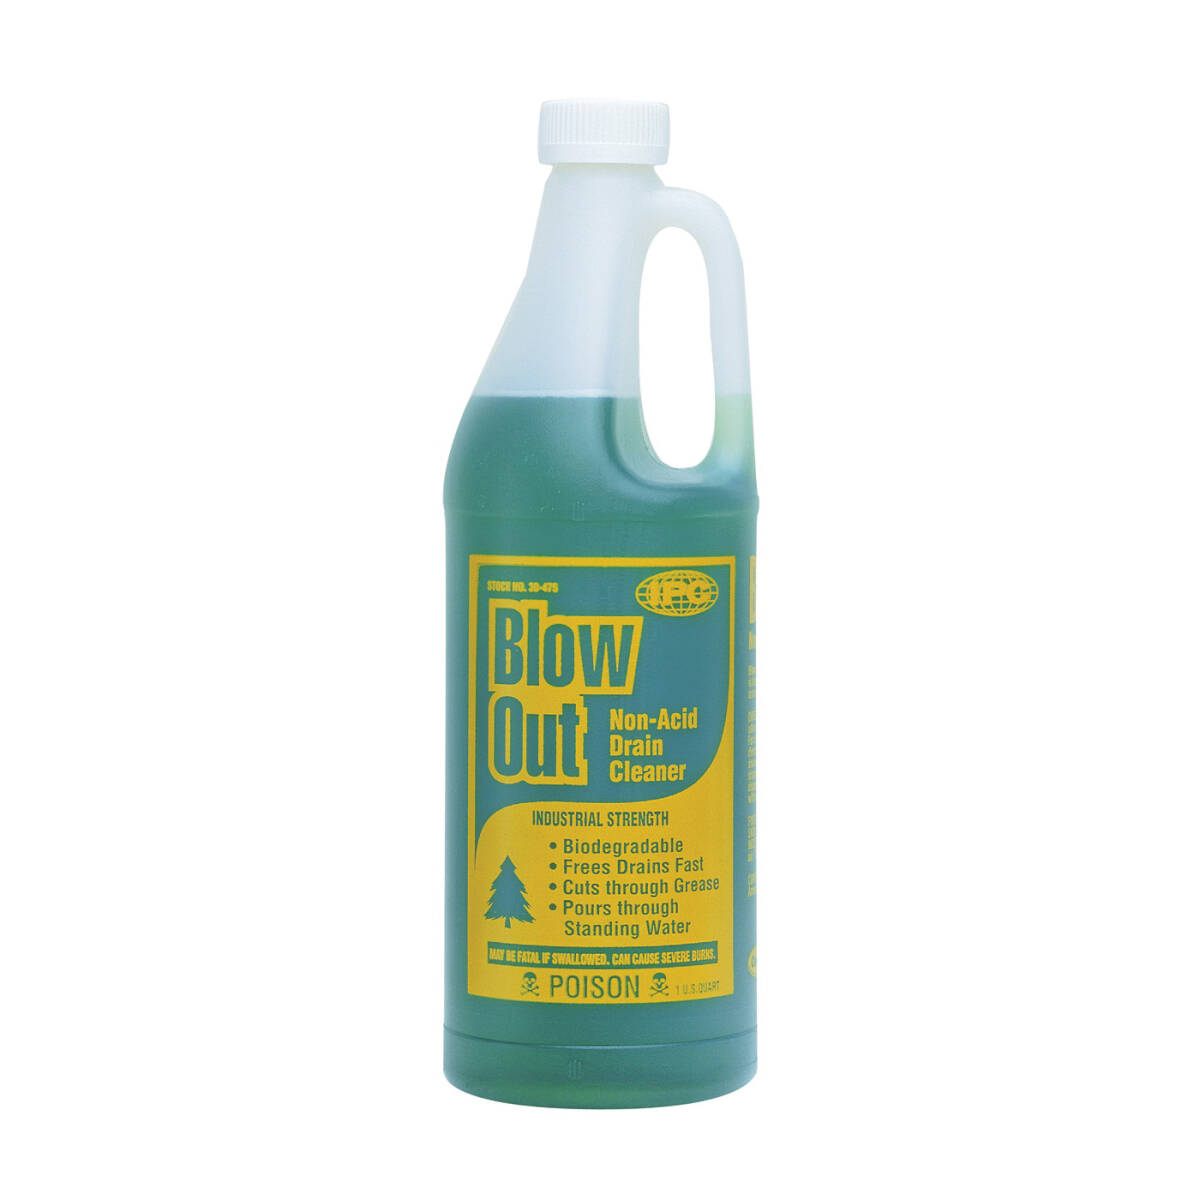 ComStar 30475 1Qt Bottle Blow Out Drain Cleaner at Sutherlands